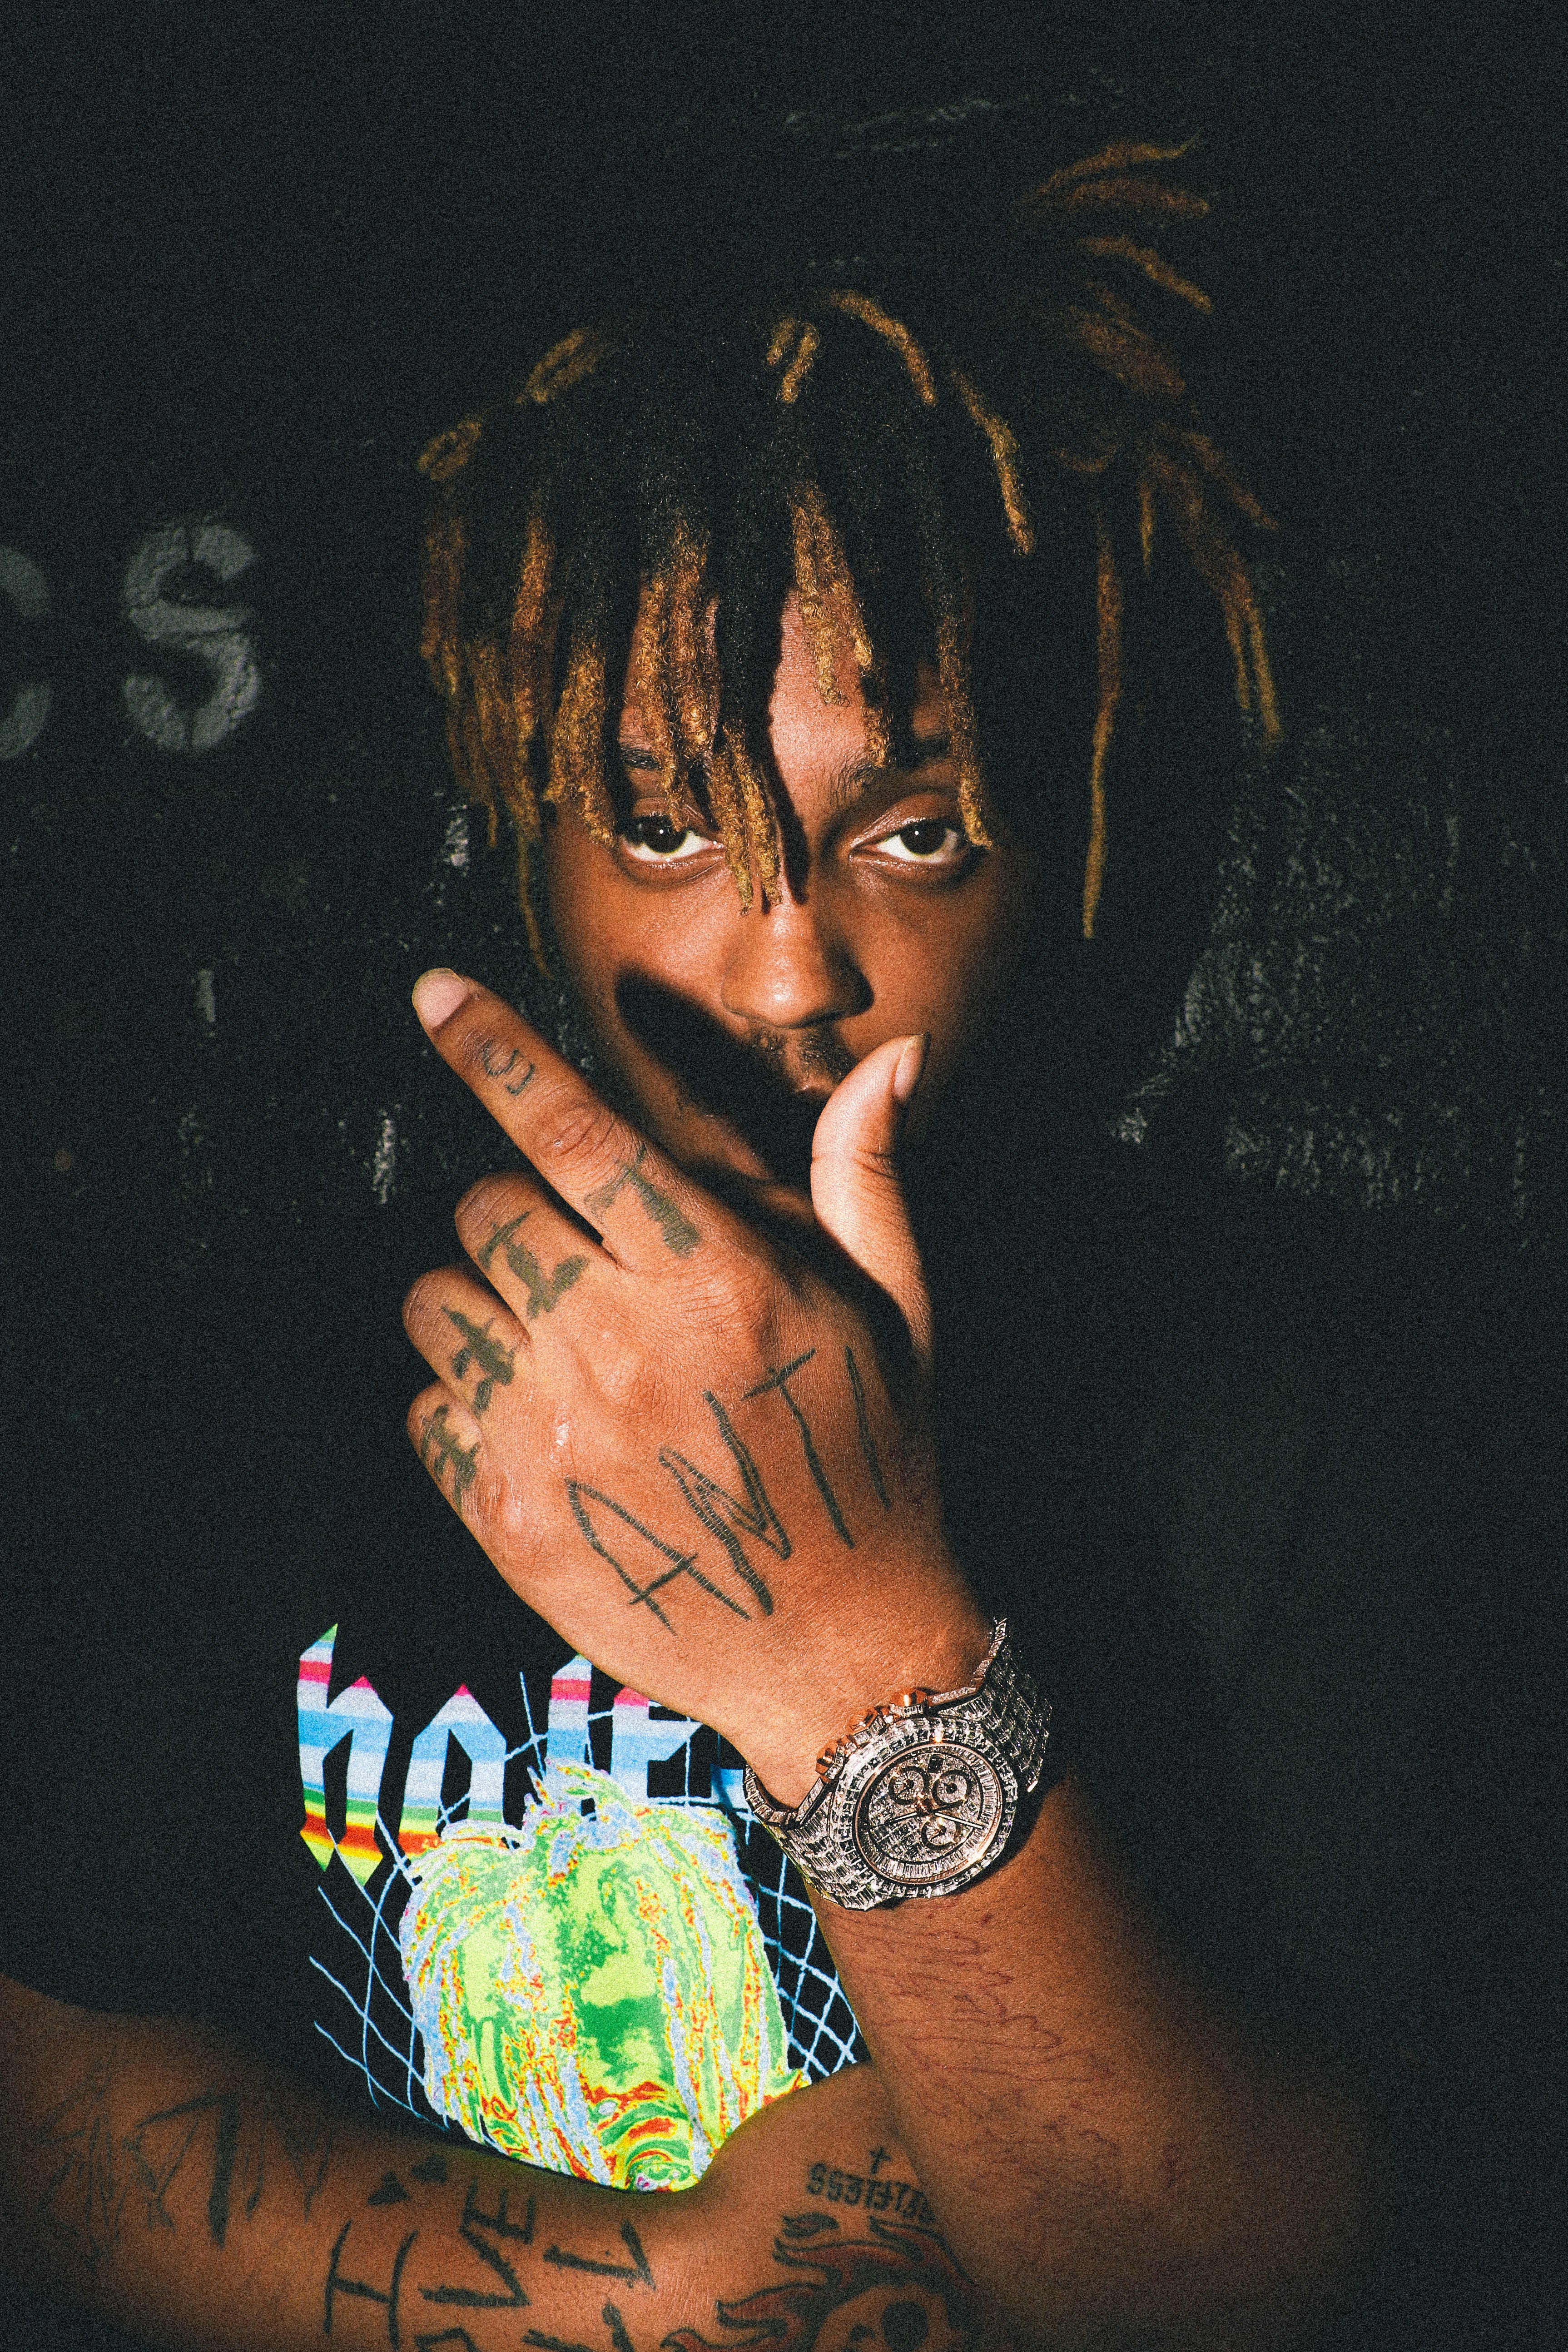 The Life and Death of Juice WRLD